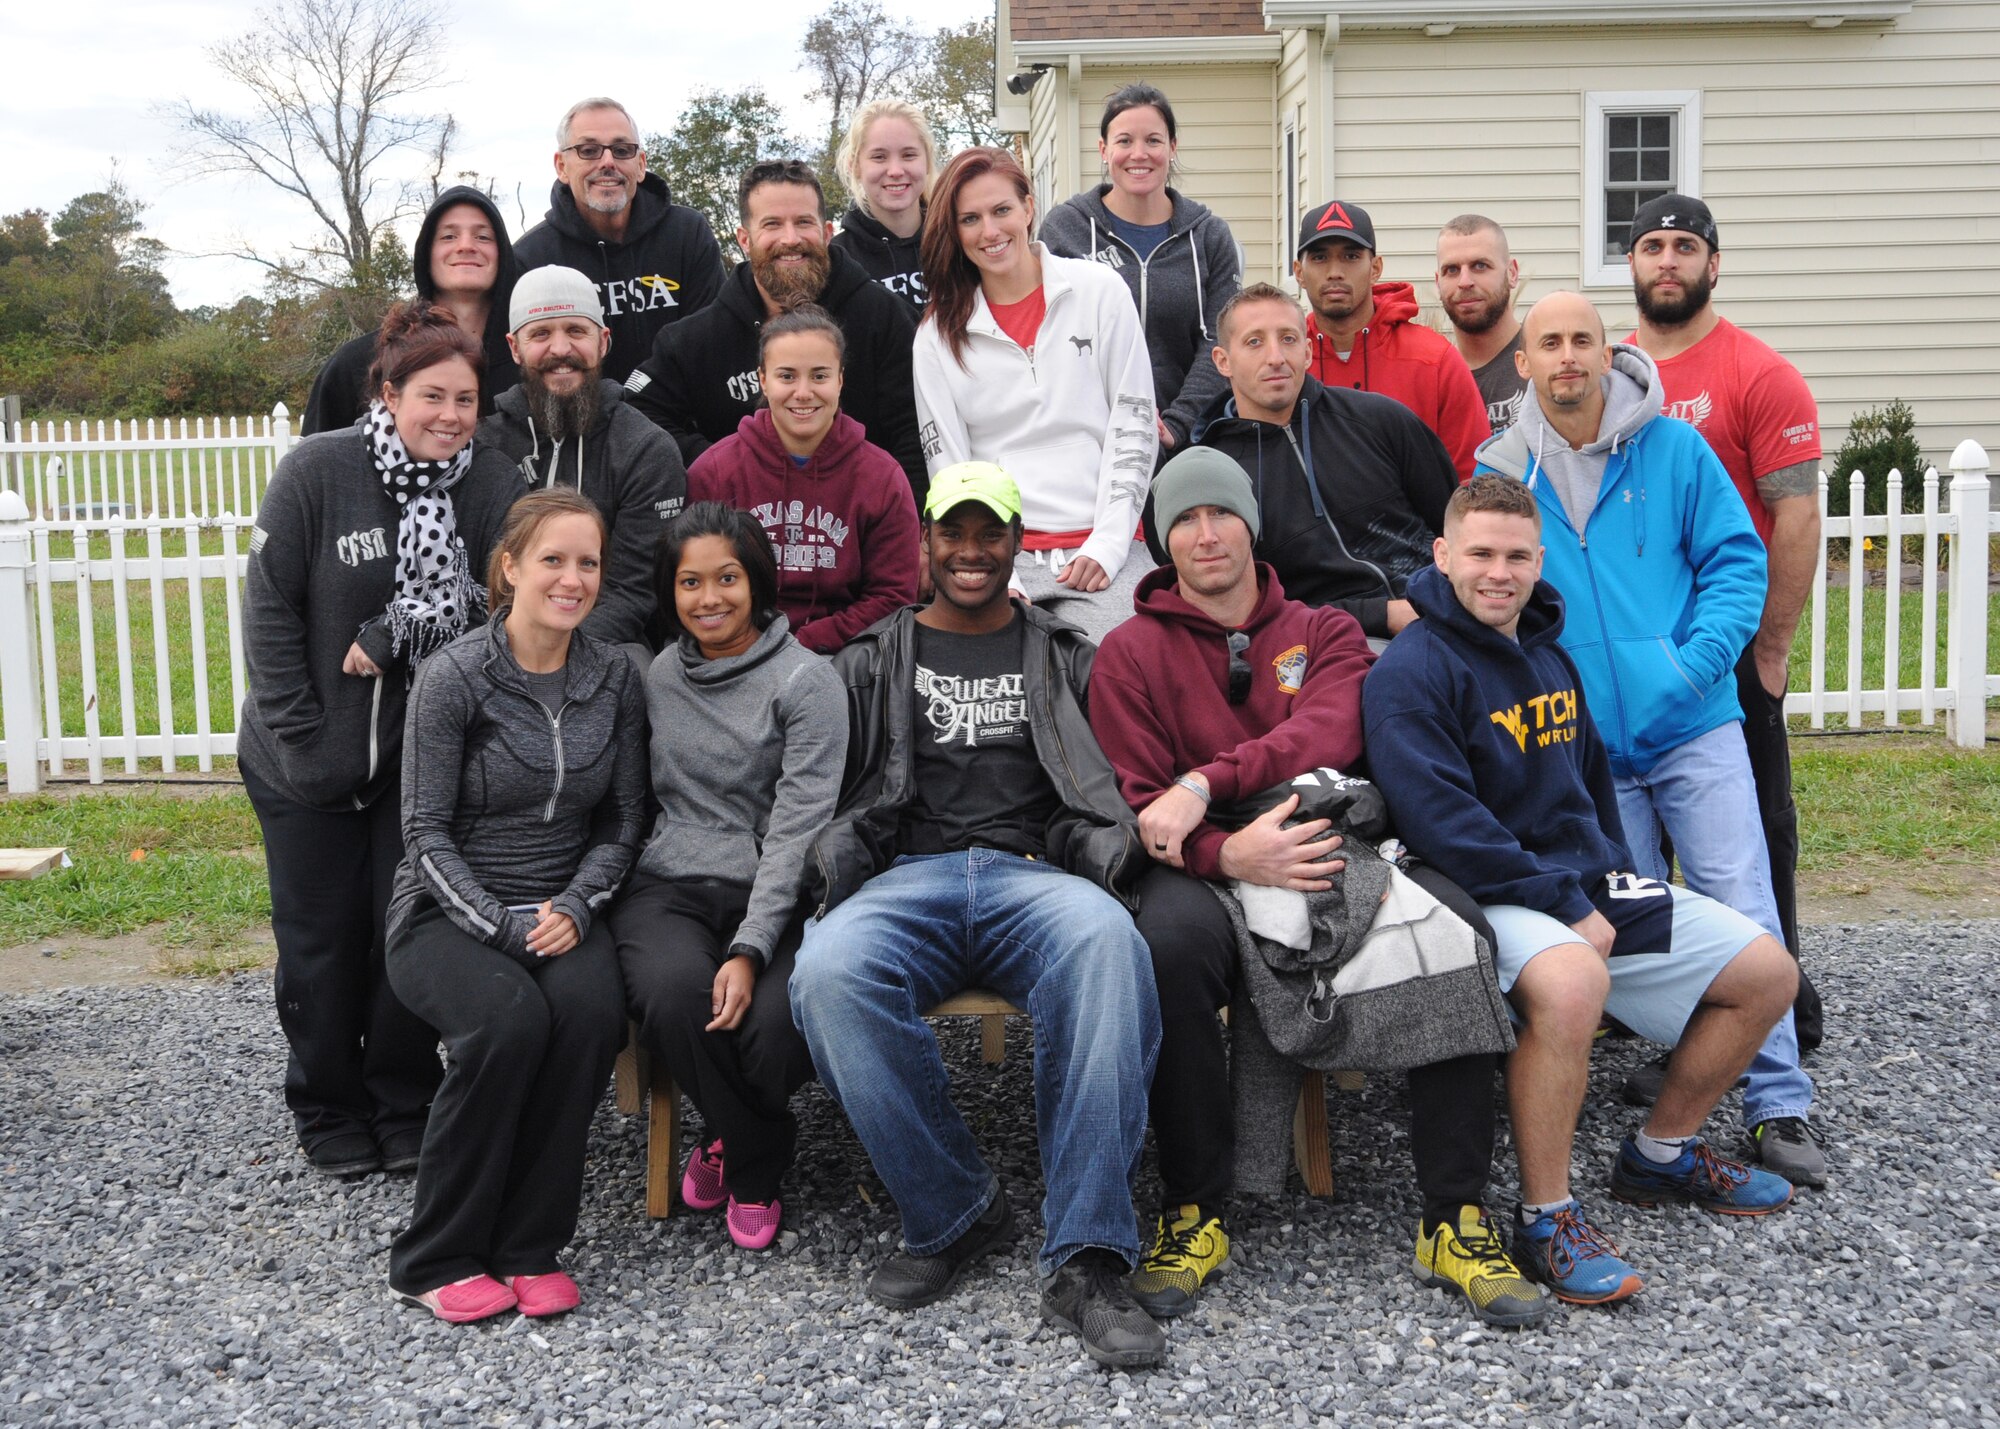 Members of Crossfit Sweat Angel pose for a group photo after the Eastern Shore Affiliate Challenge Oct. 17, 2015, in Georgetown, Del. Multiple Airmen from Team Dover and several CrossFit gyms participated in EASC. (U.S. Air Force photo/Staff Sgt. Elizabeth Morris)